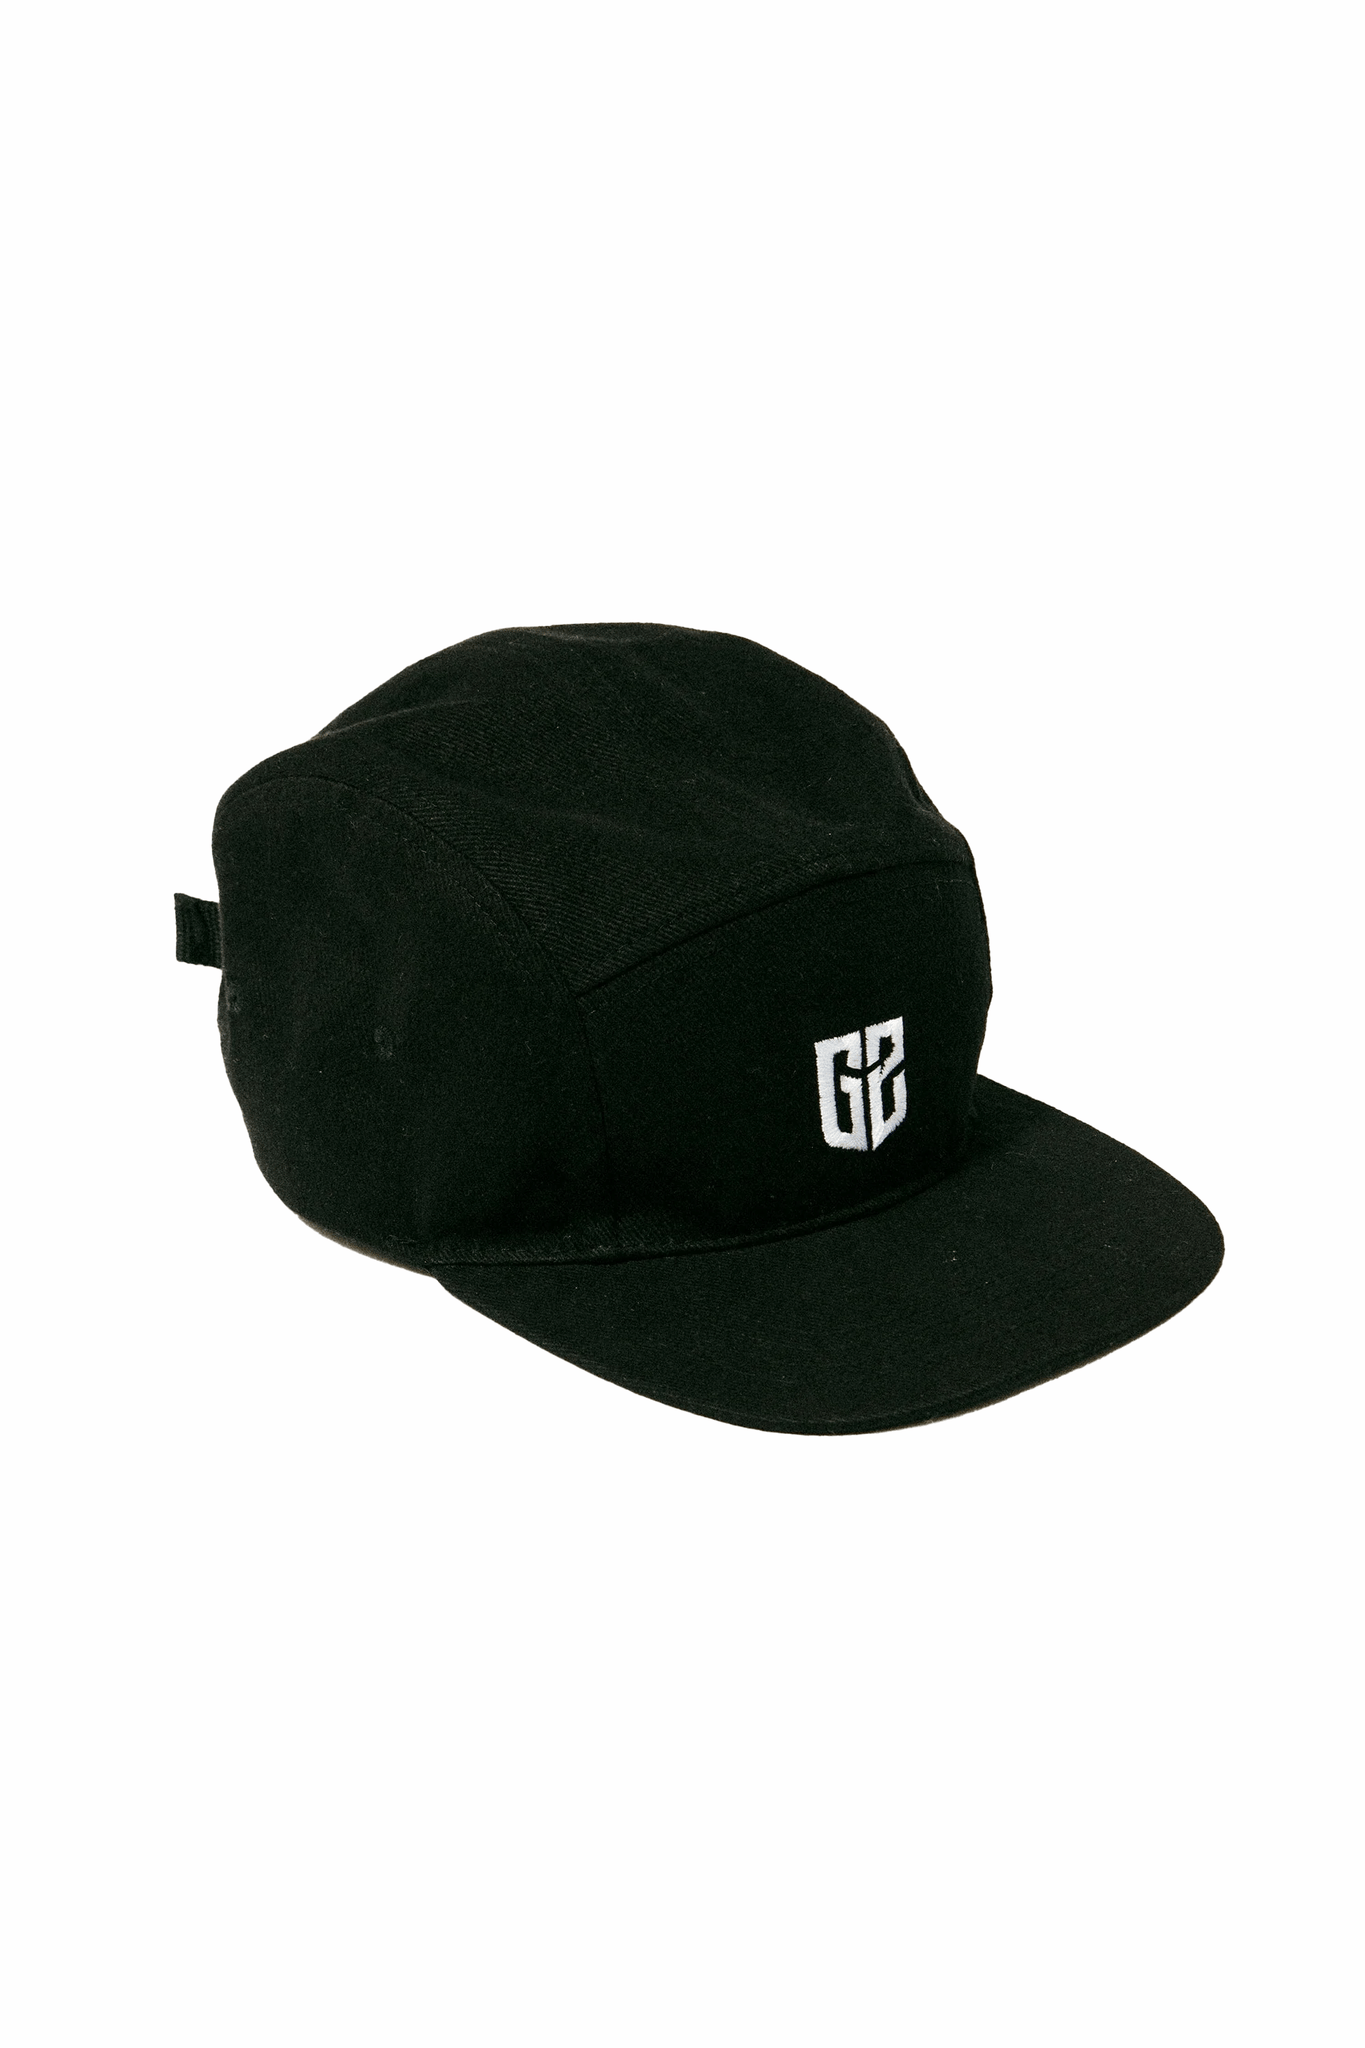 Black G2 Esports essentials 5-panel cap - a sleek accessory to complete your style while supporting your favorite esports team